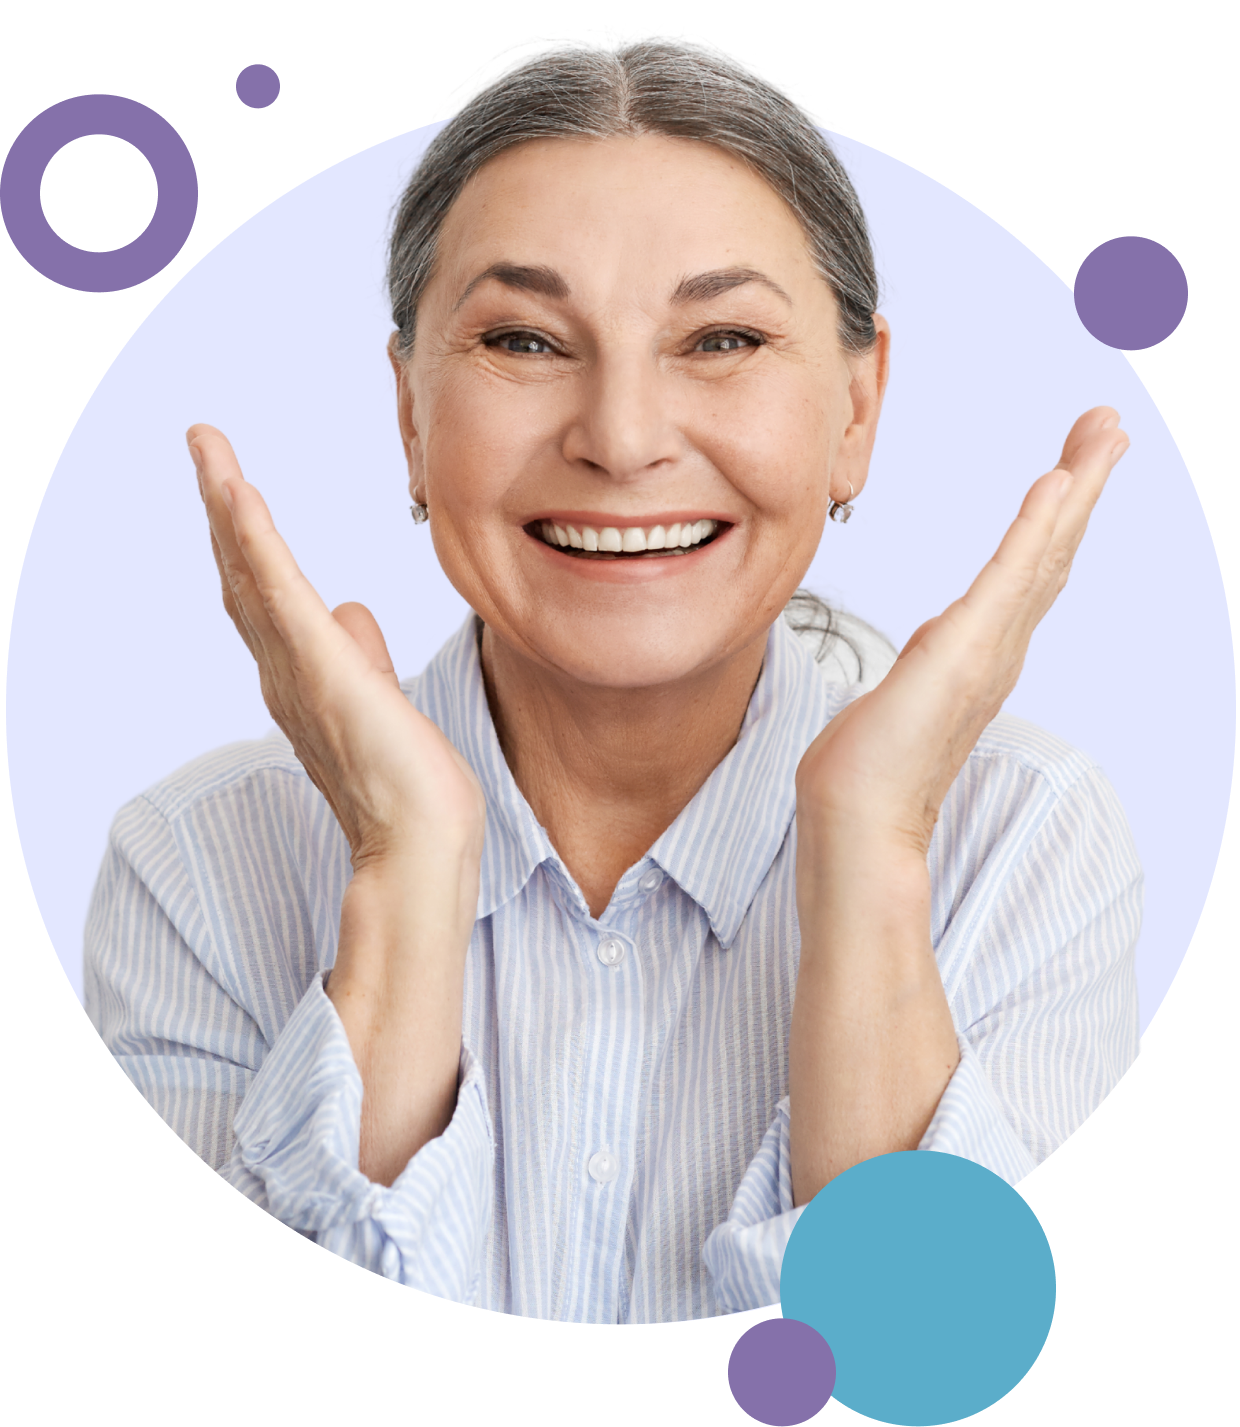 Middle aged woman smiling with dental implants